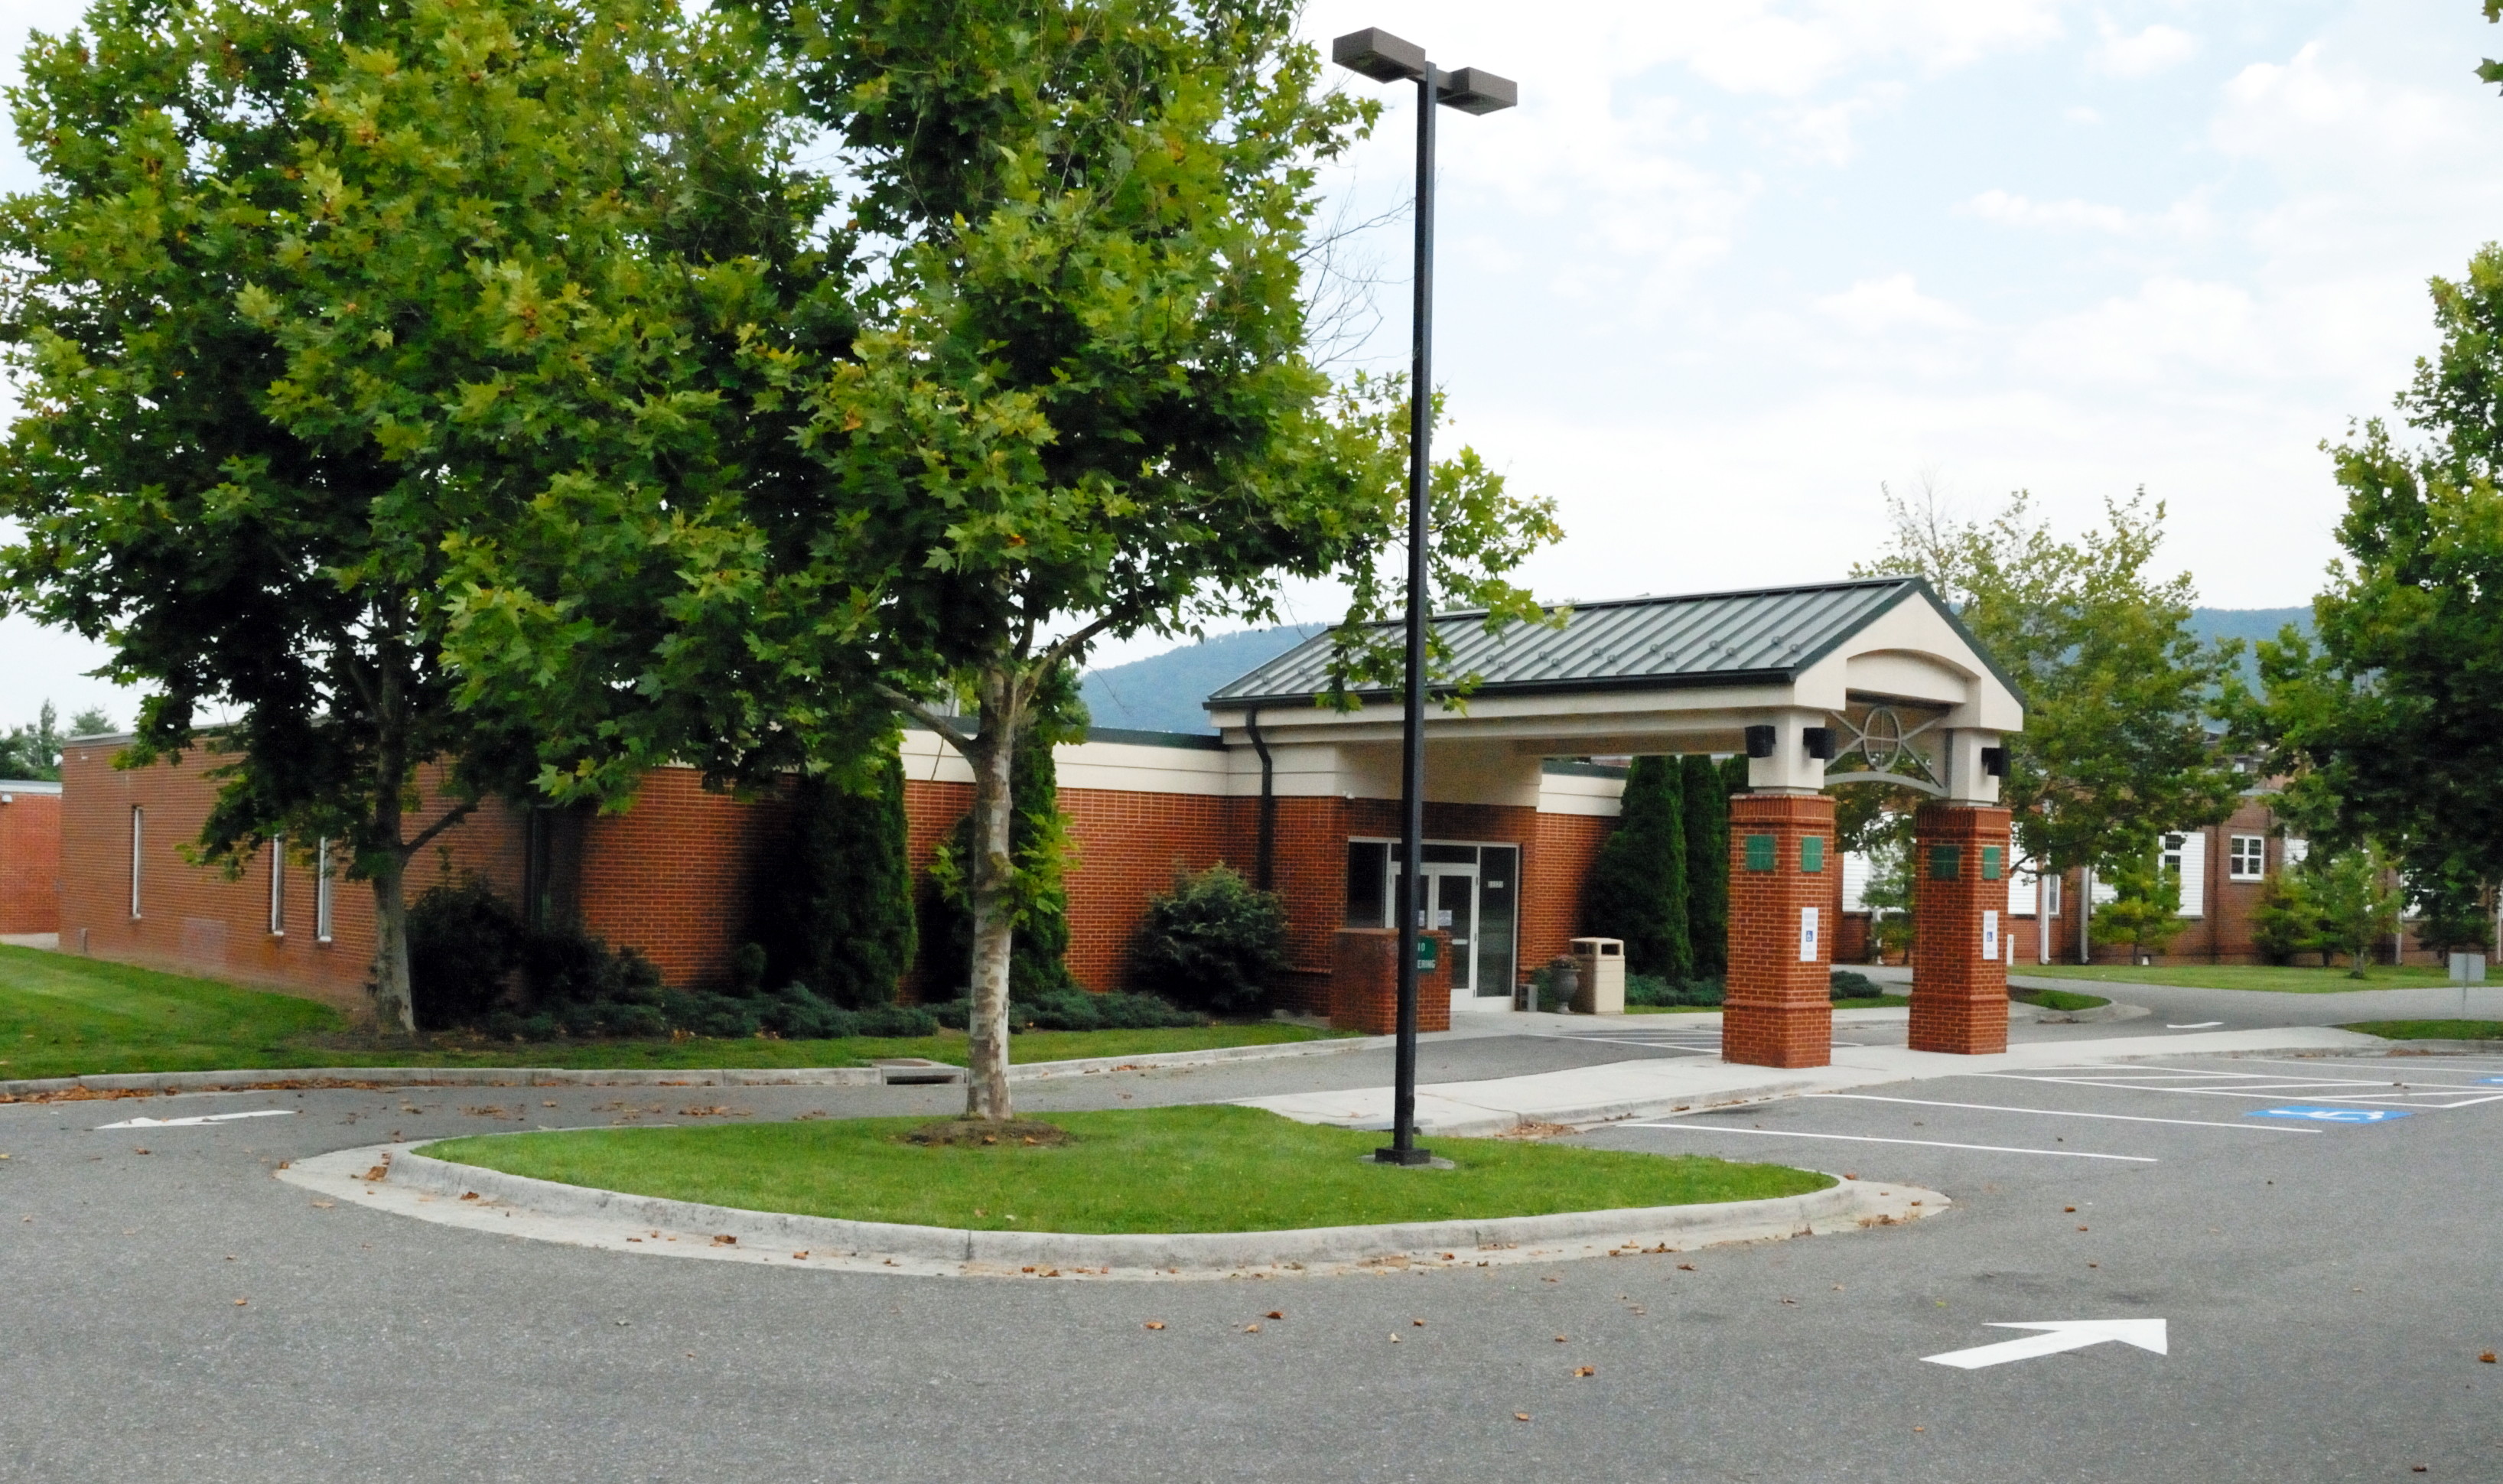 Photo of the Montvale Library